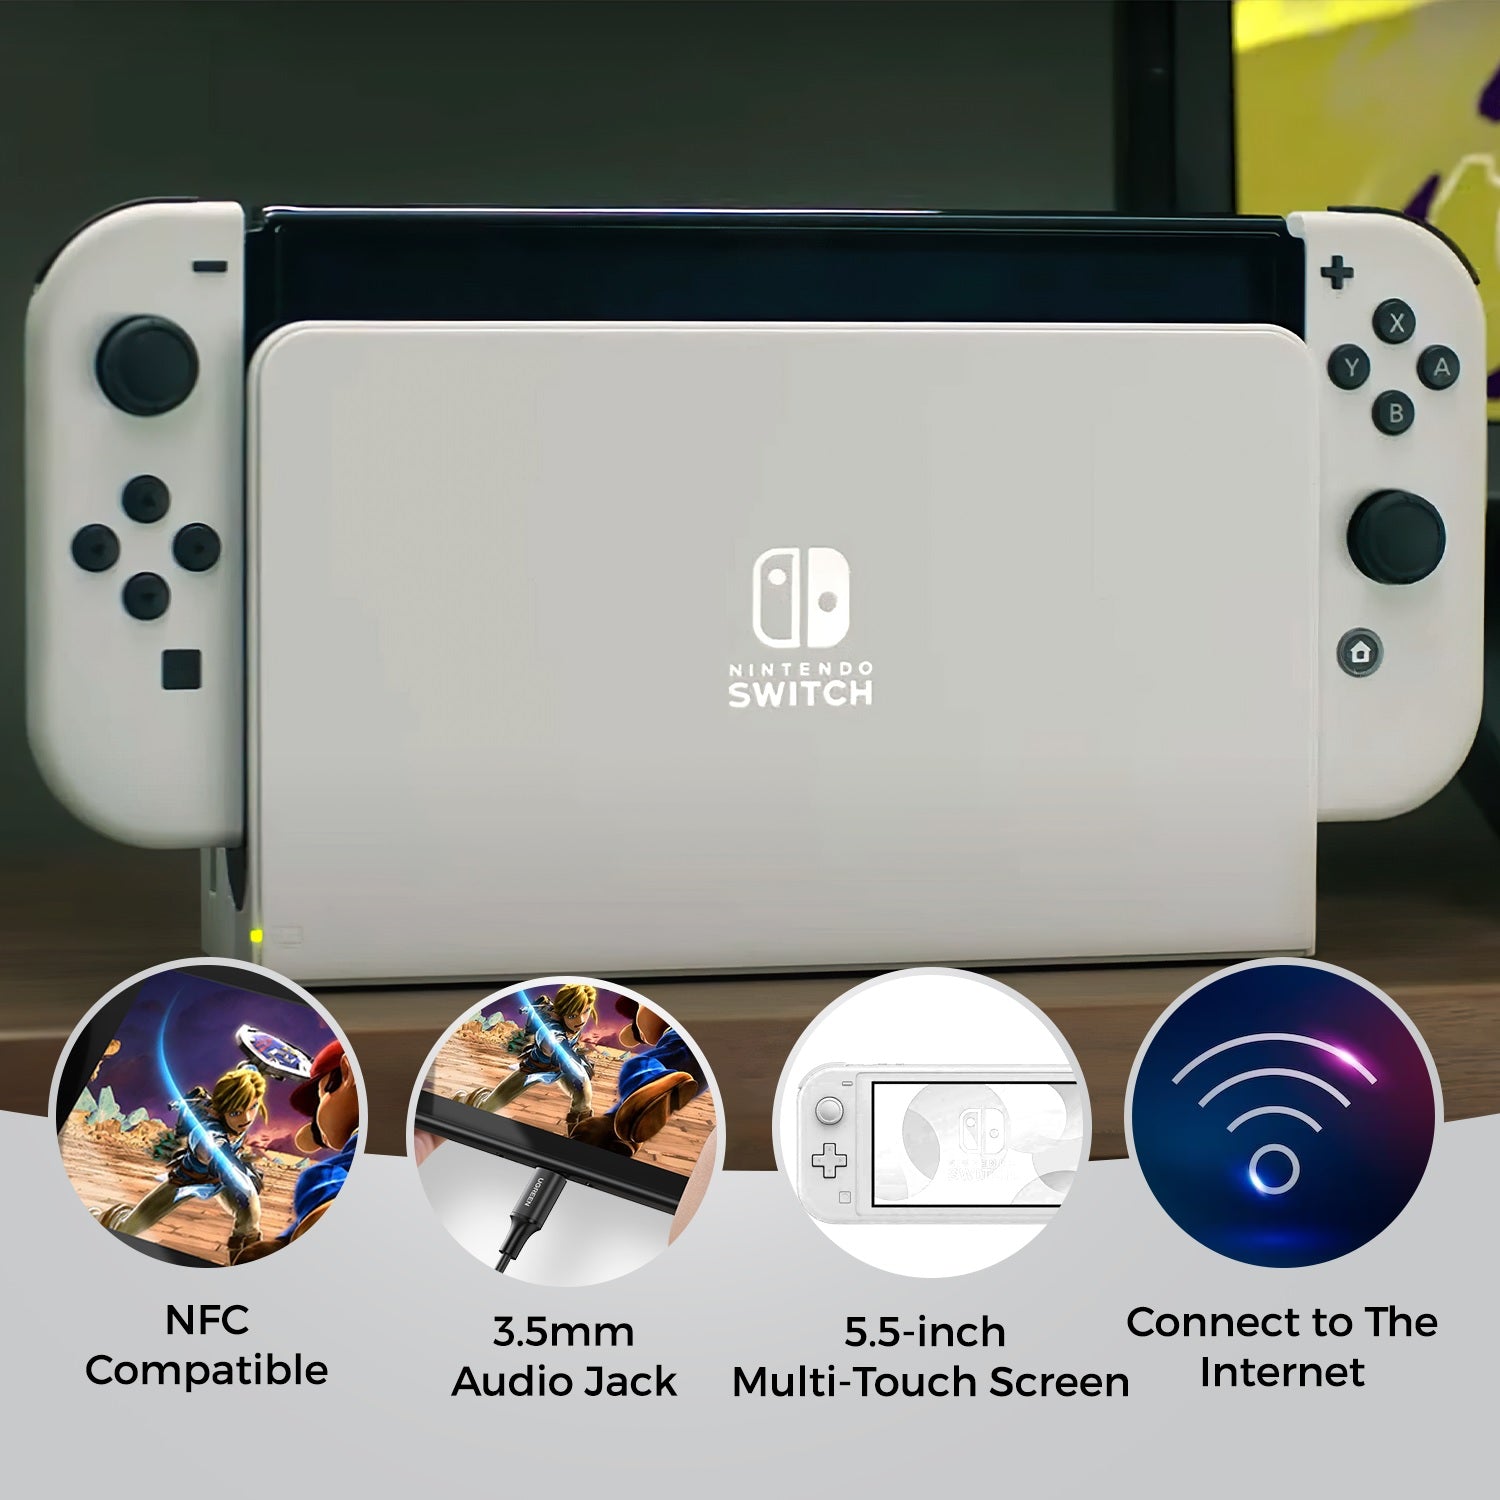 Nintendo Switch OLED White with Mario Kart 8 Deluxe, 128GB Card Bundle